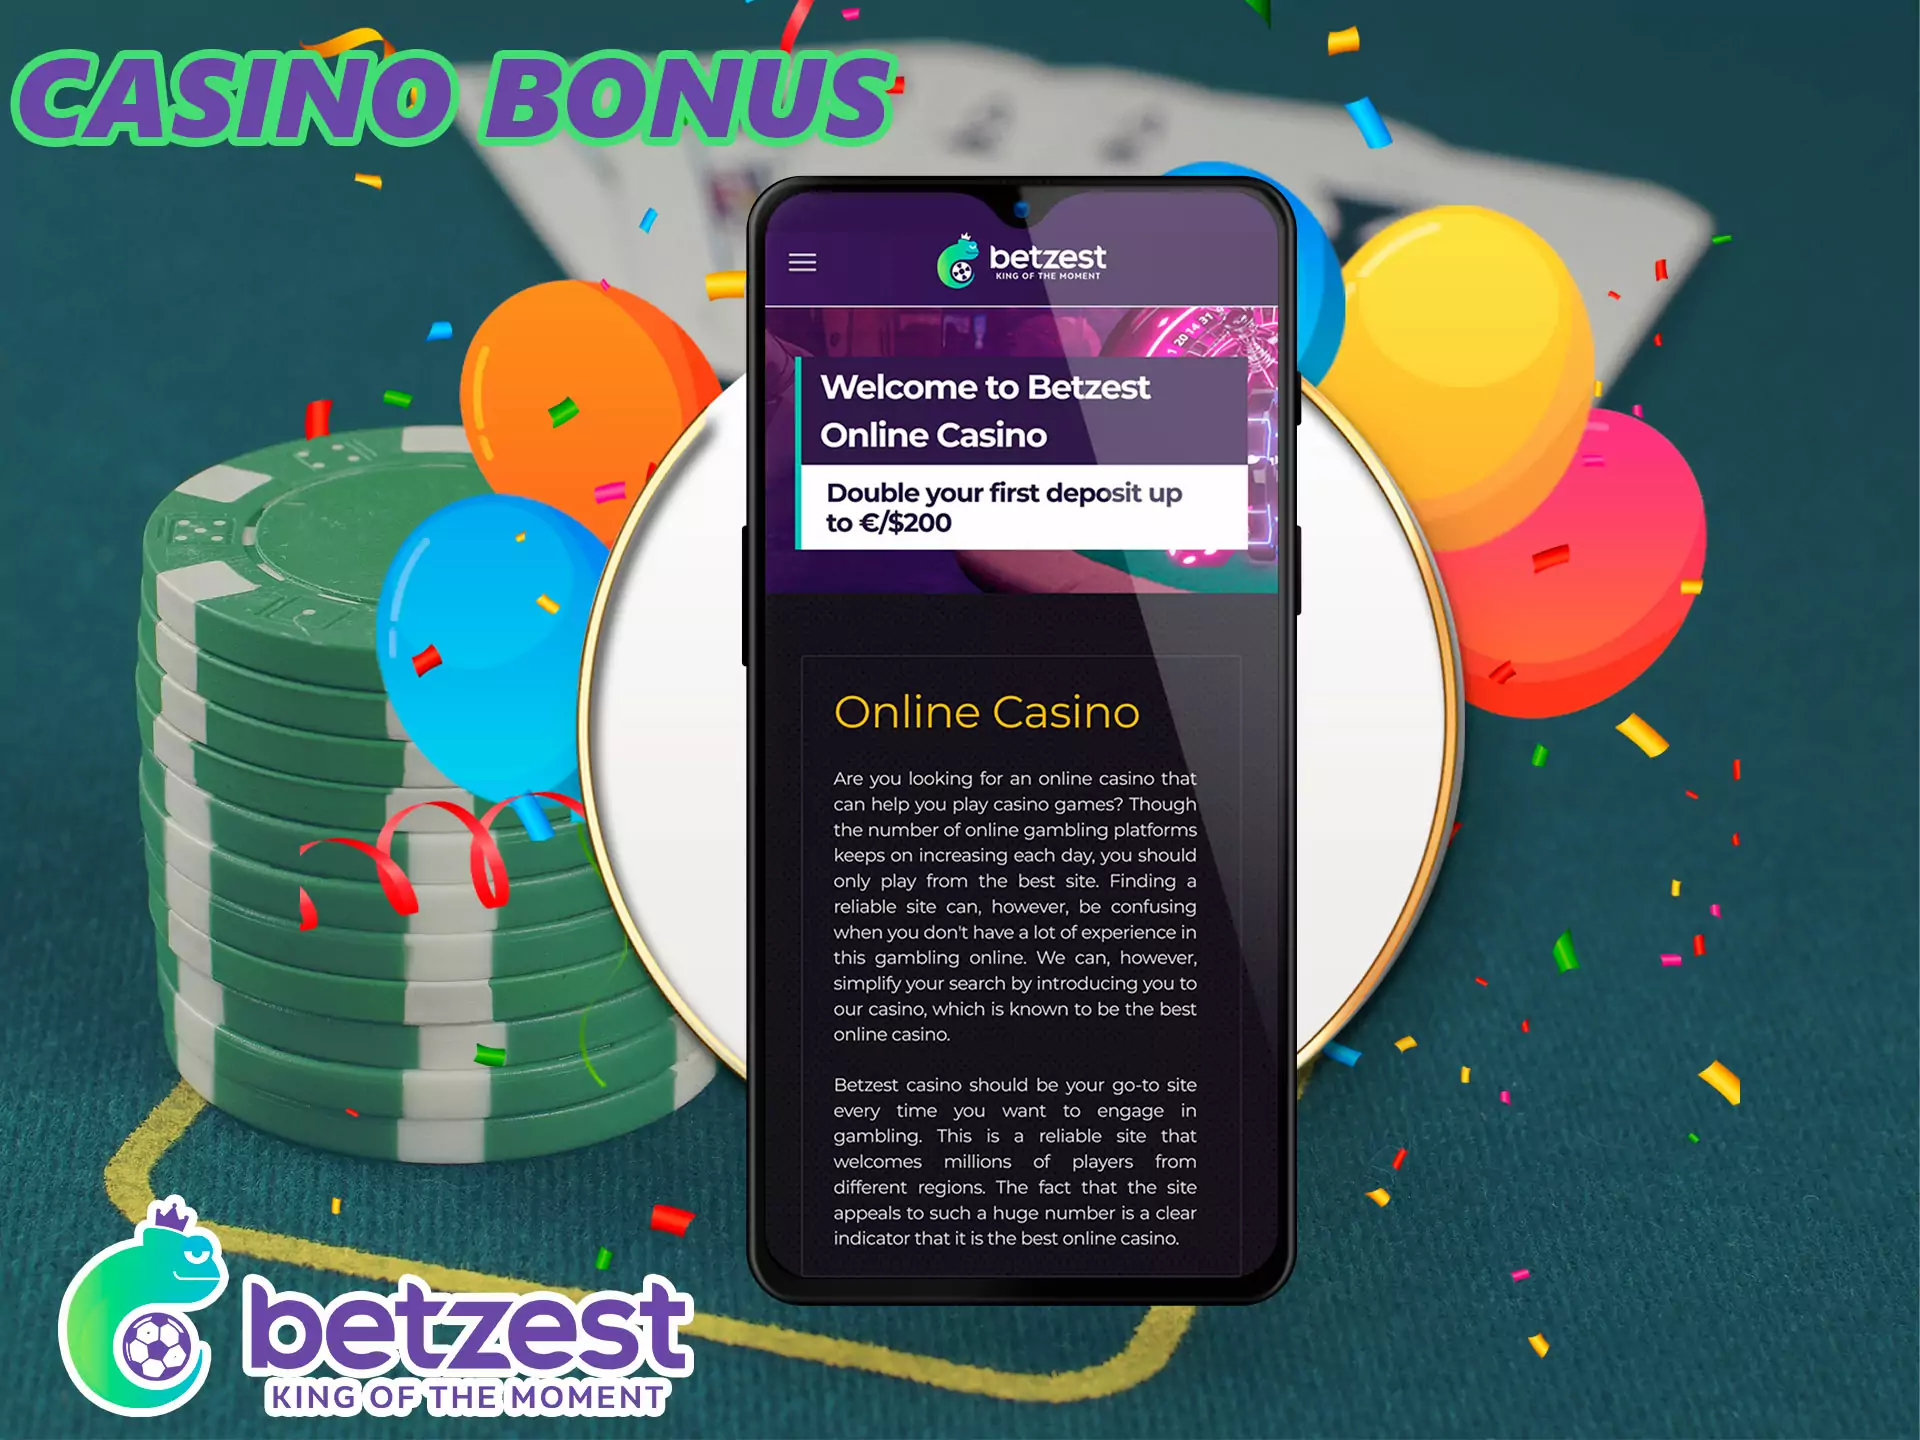 A nice gift for Azat players, the deposit will increase by 100% and can be up to 100 INR.